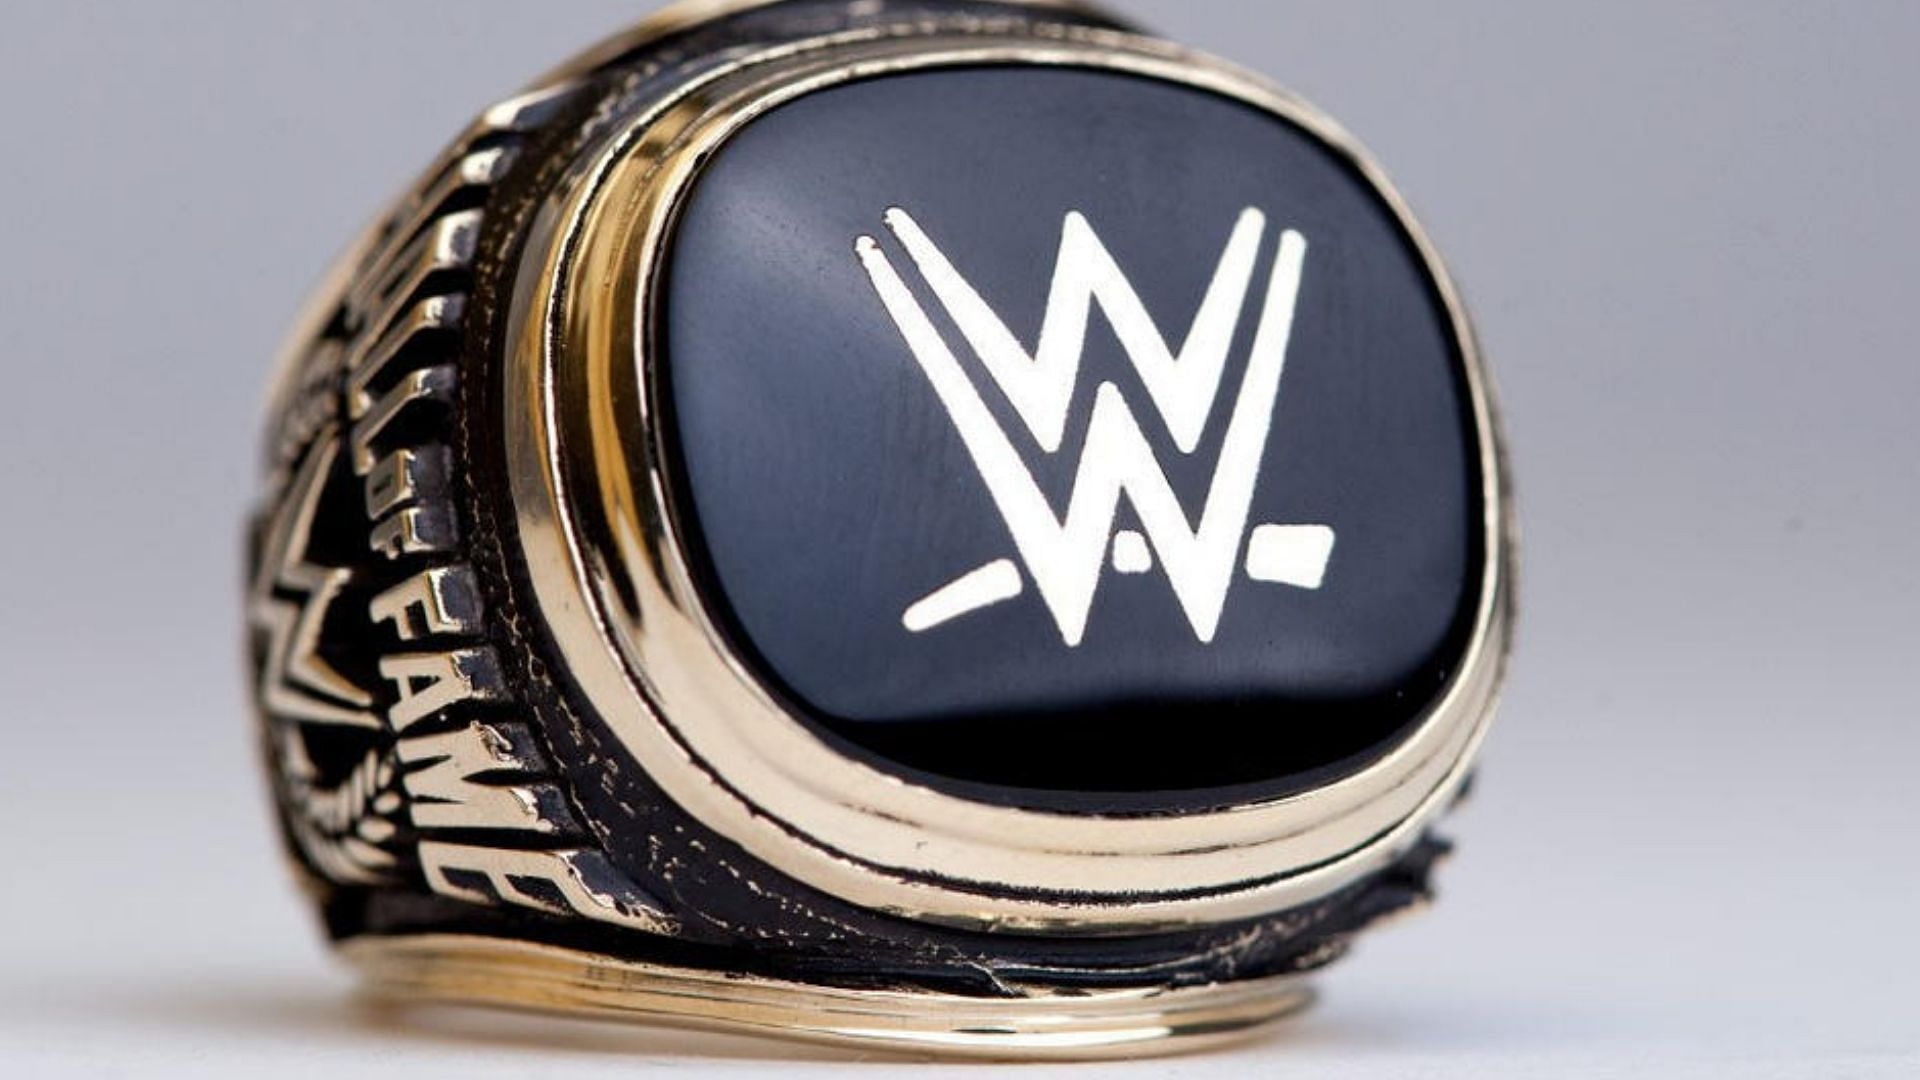 The WWE Hall of Fame ring is a mark of excellence in the wrestling business.